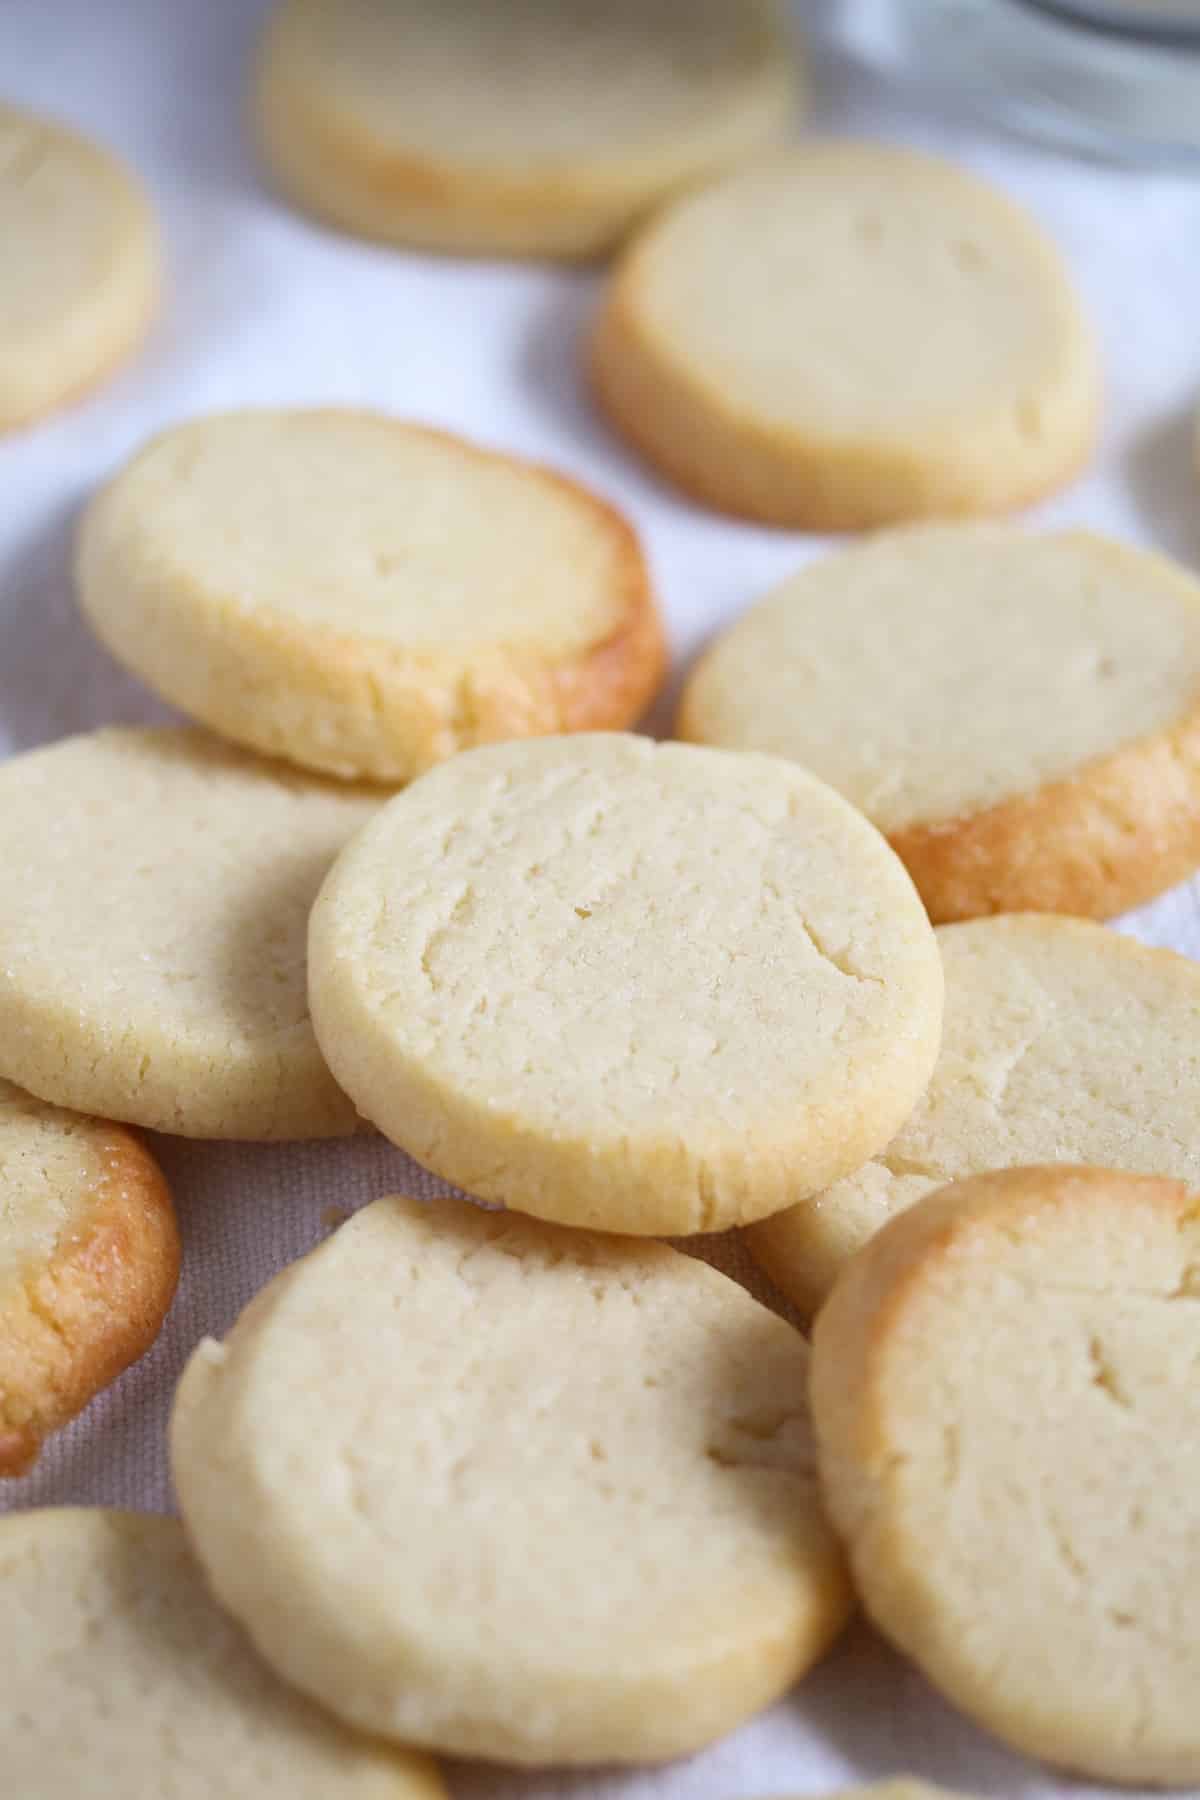 many round biscuits with sweetened condensed milk on the table.